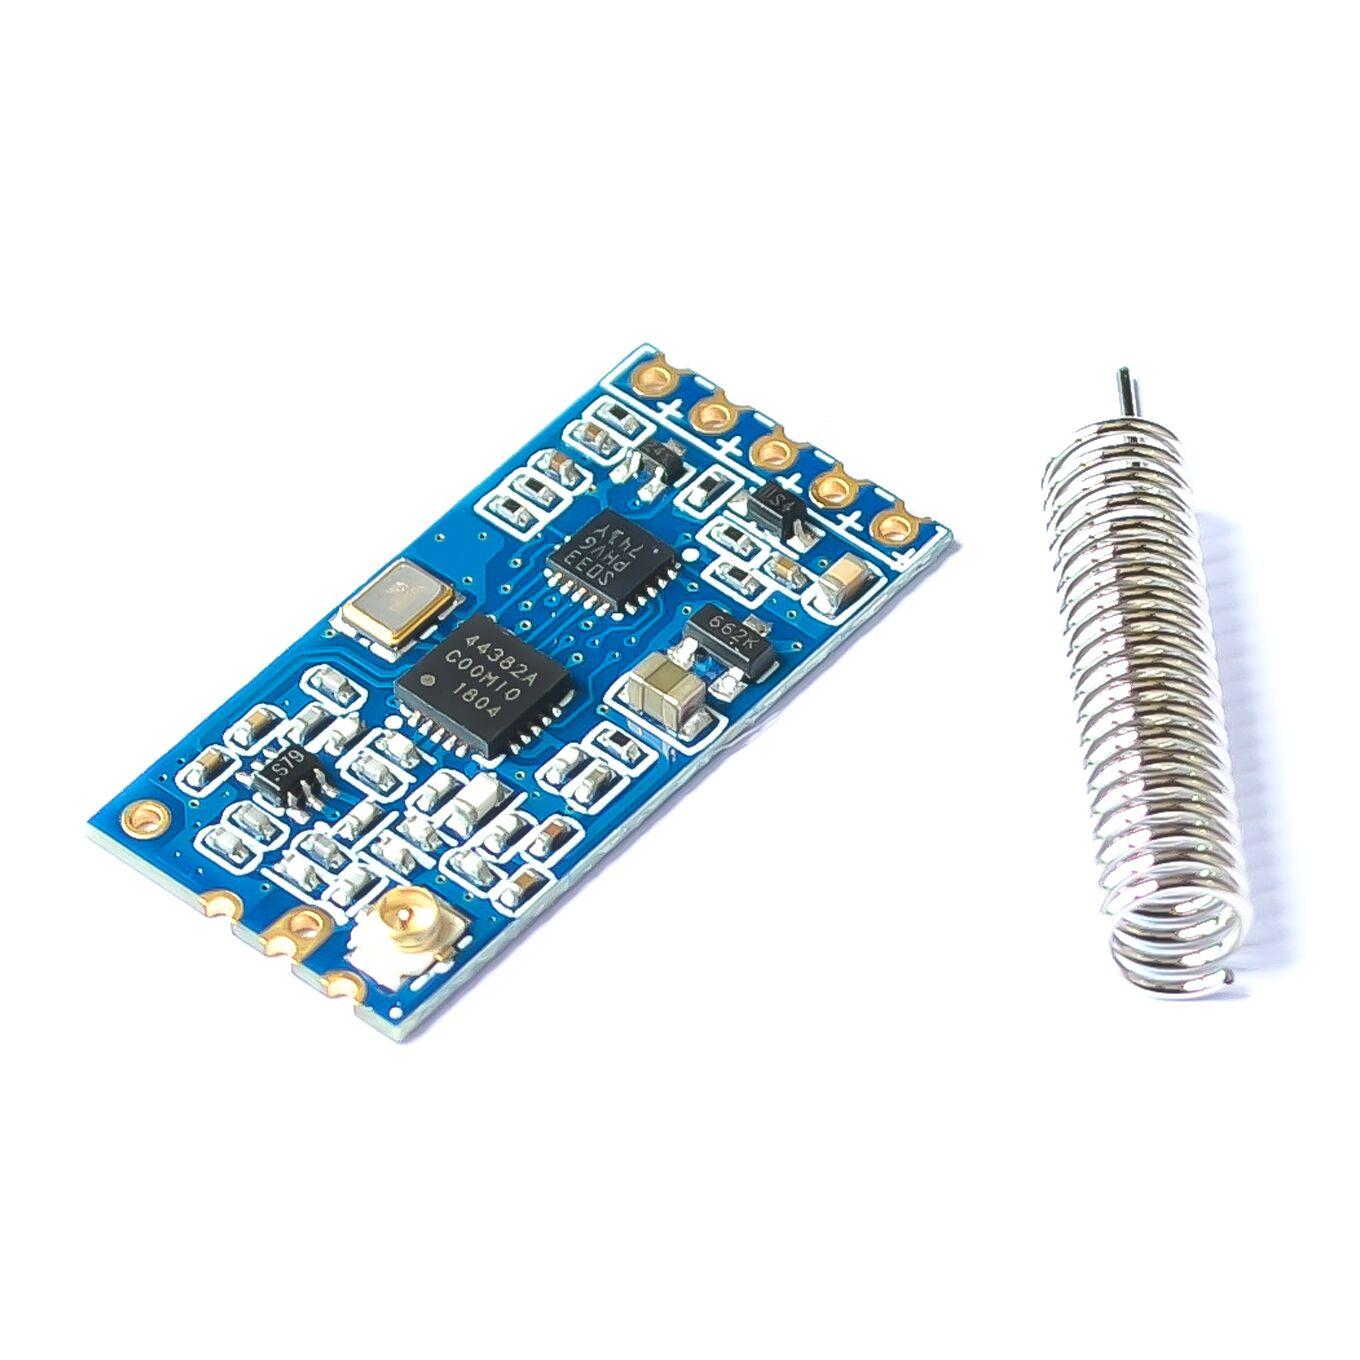 HC-12 SI4463 wireless microcontroller serial, 433 long-range, 1000M with antenna for Bluetooth